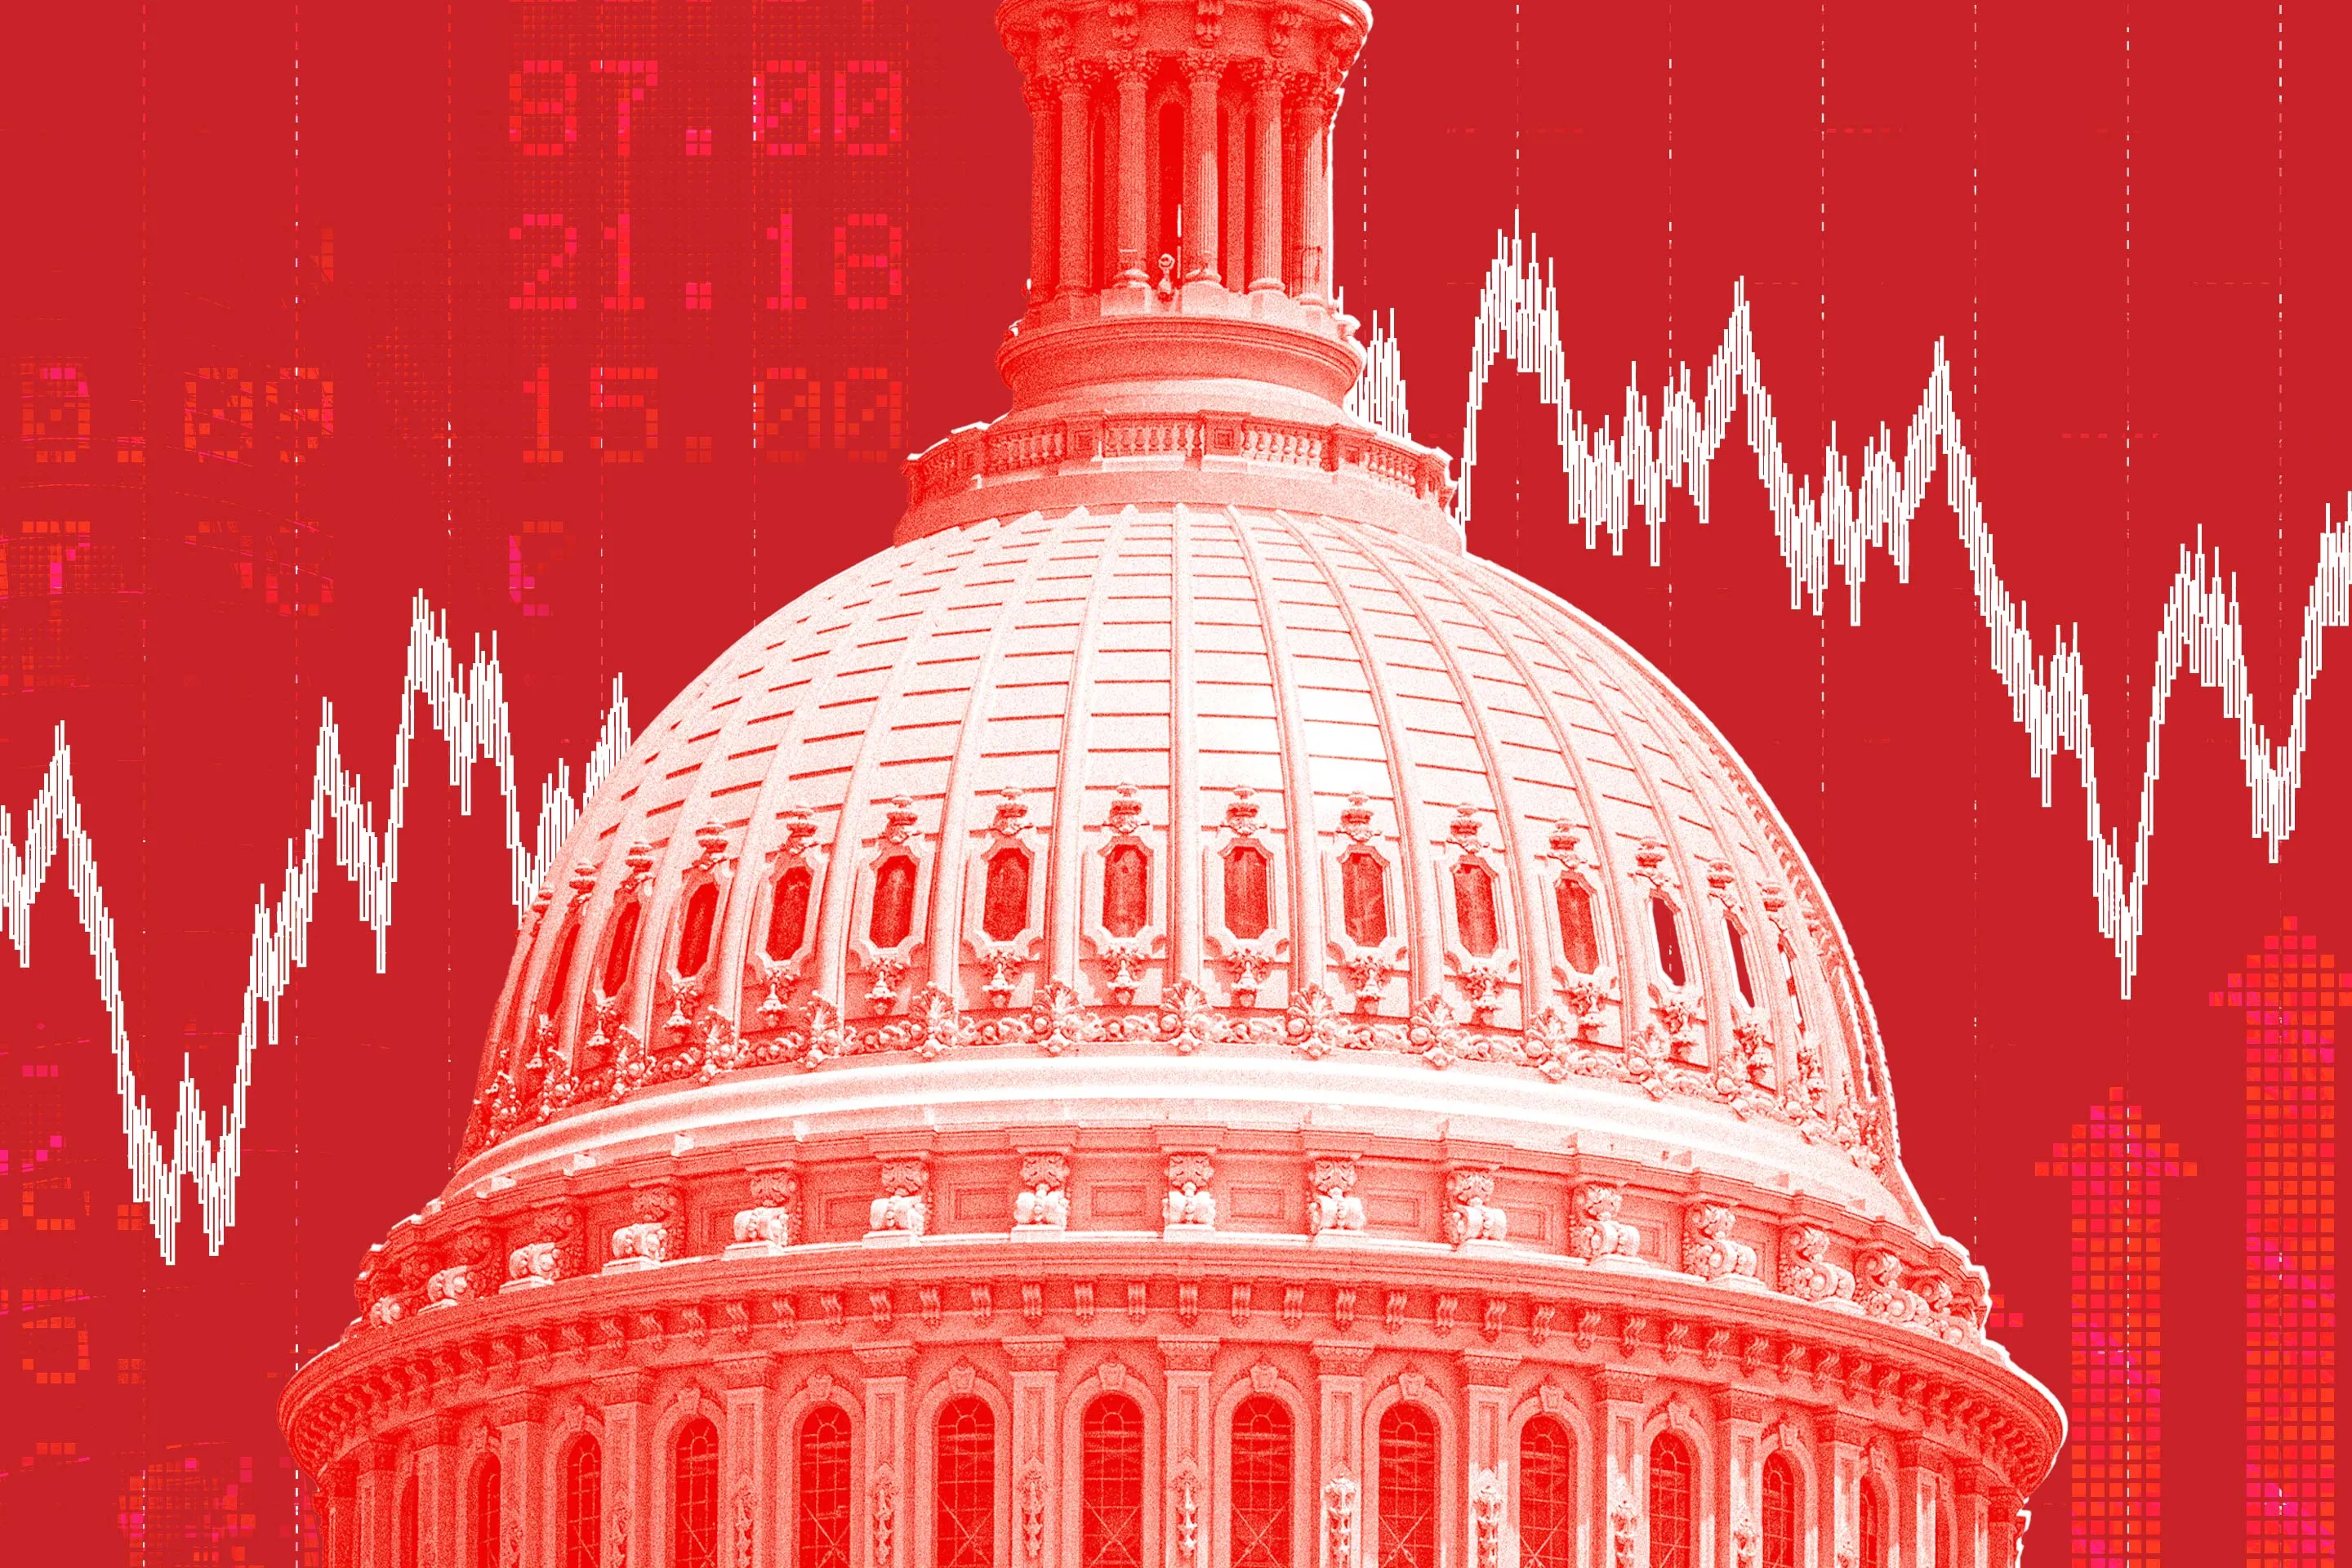 Members of Congress Are Getting Rich Trading Stocks. Should That Be Illegal?